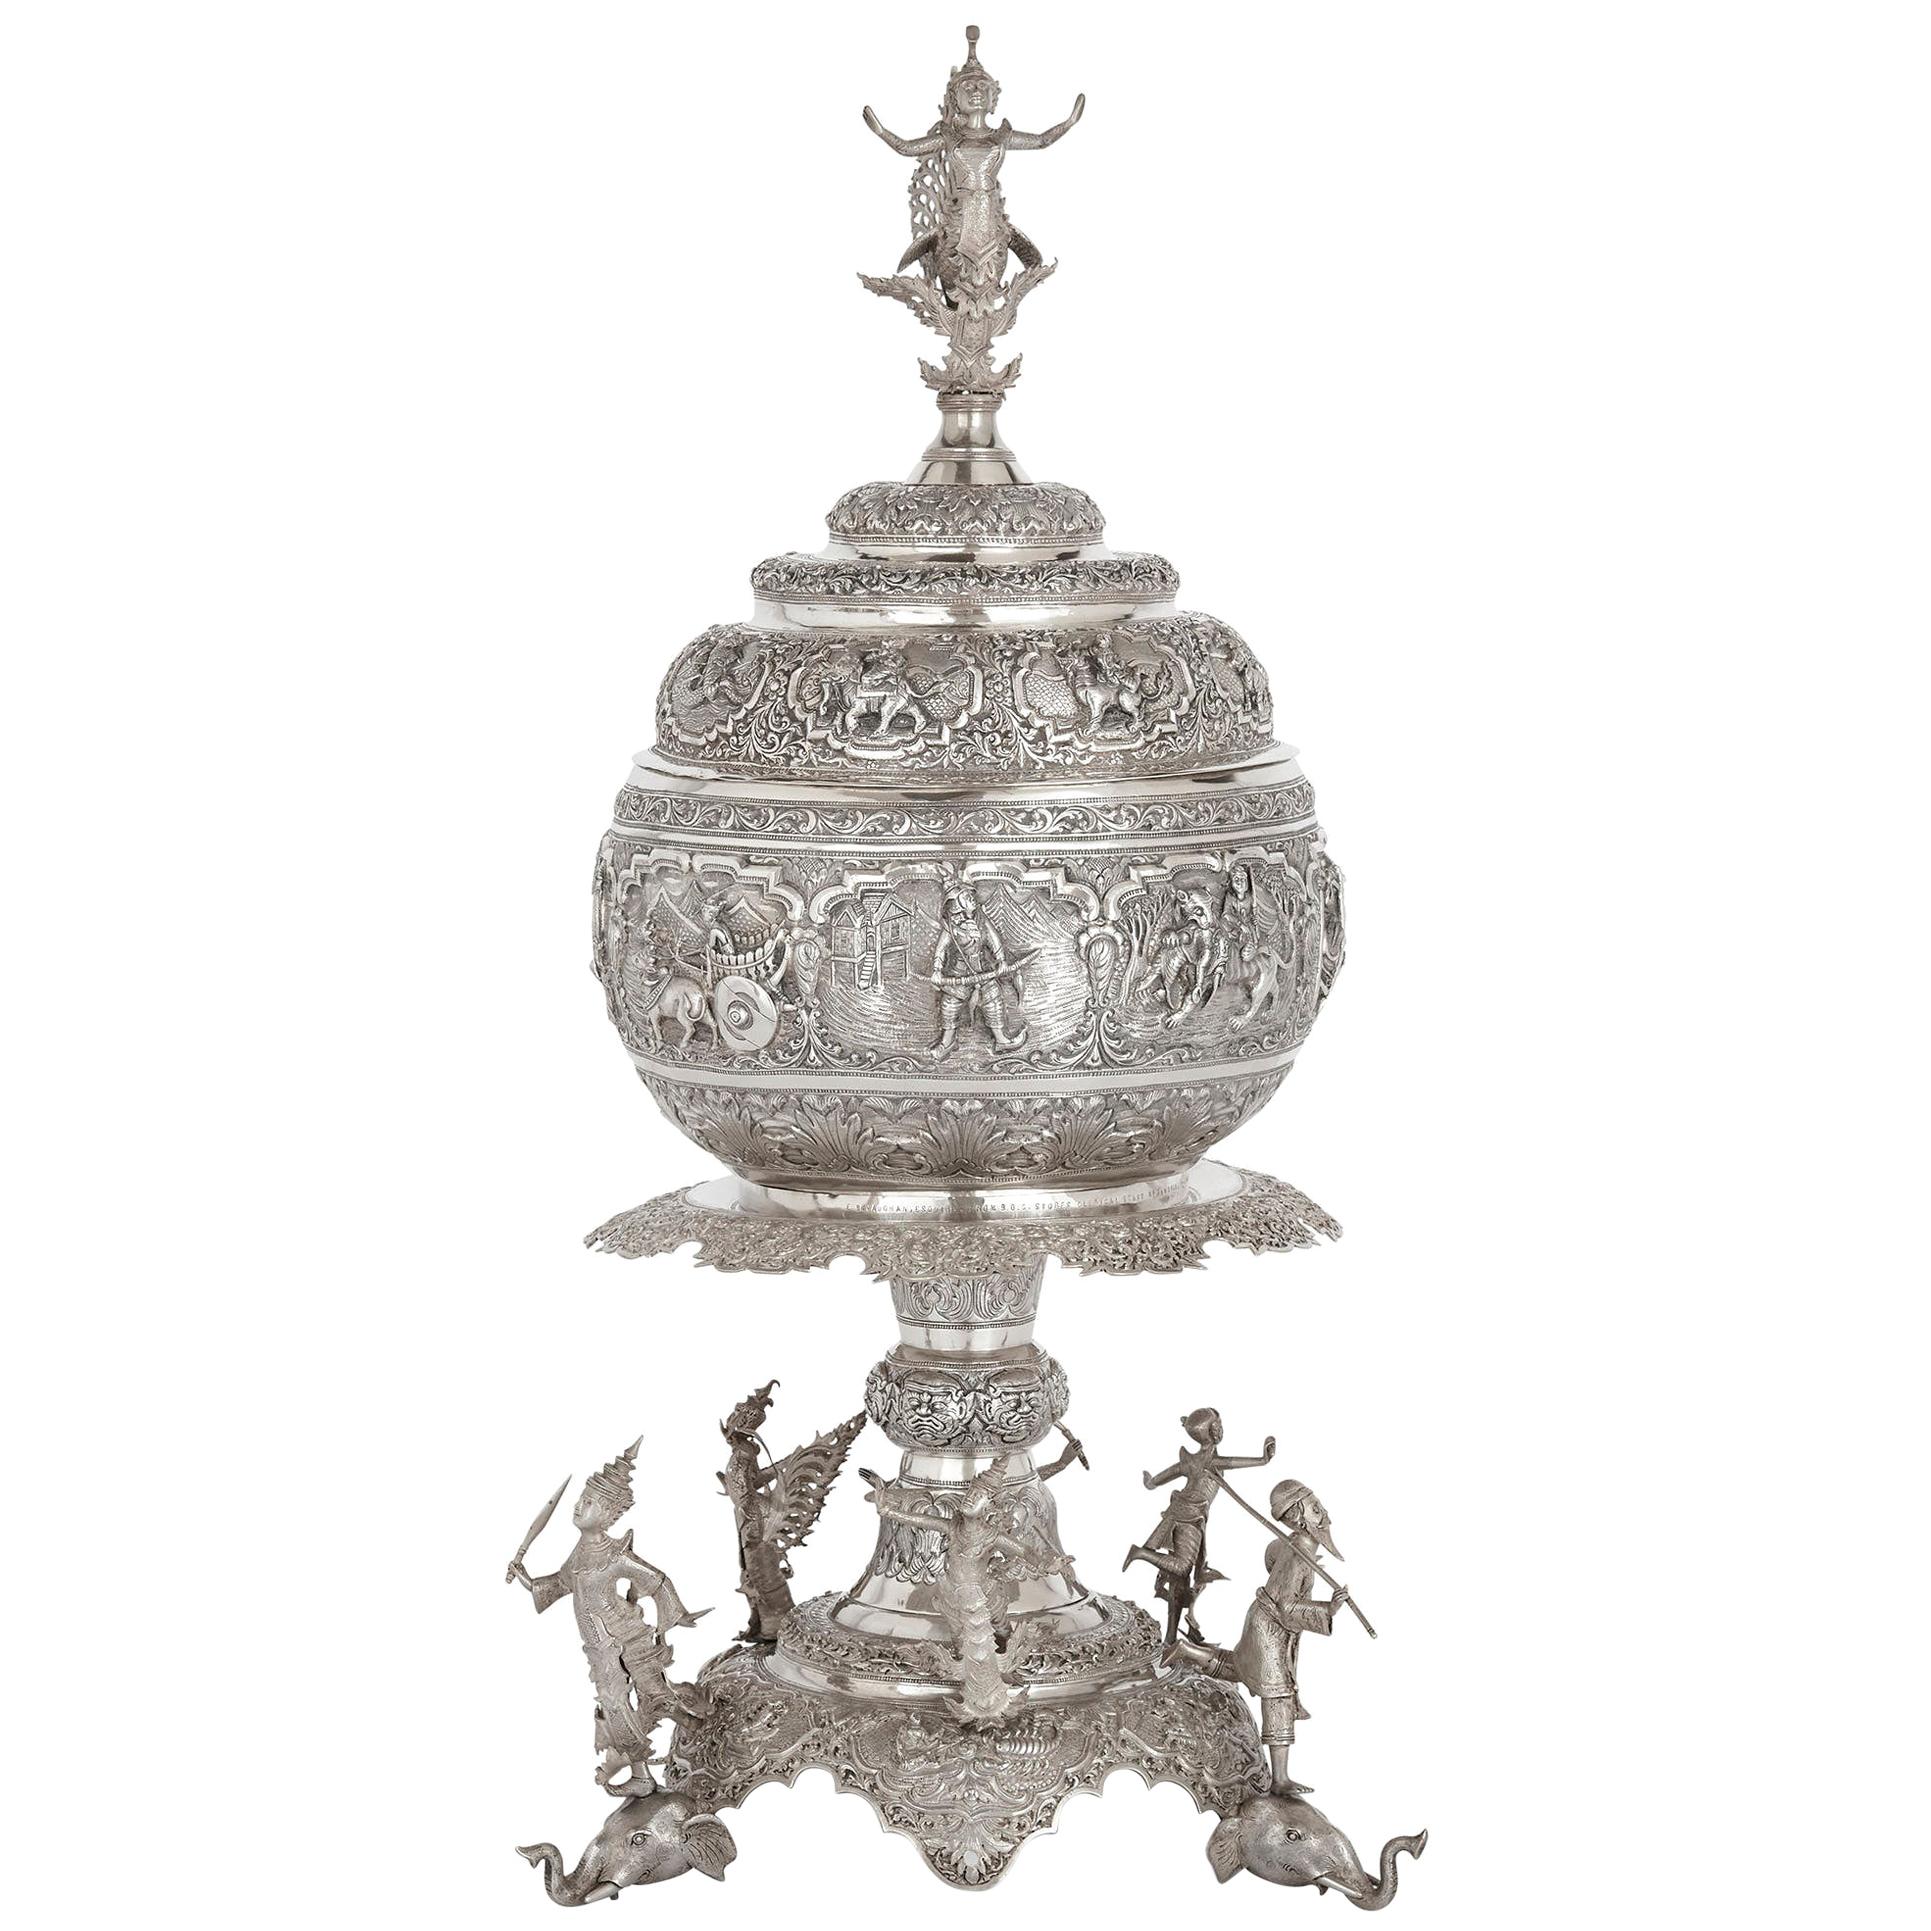 Large and Impressive Silver Centrepiece Vase from Burma